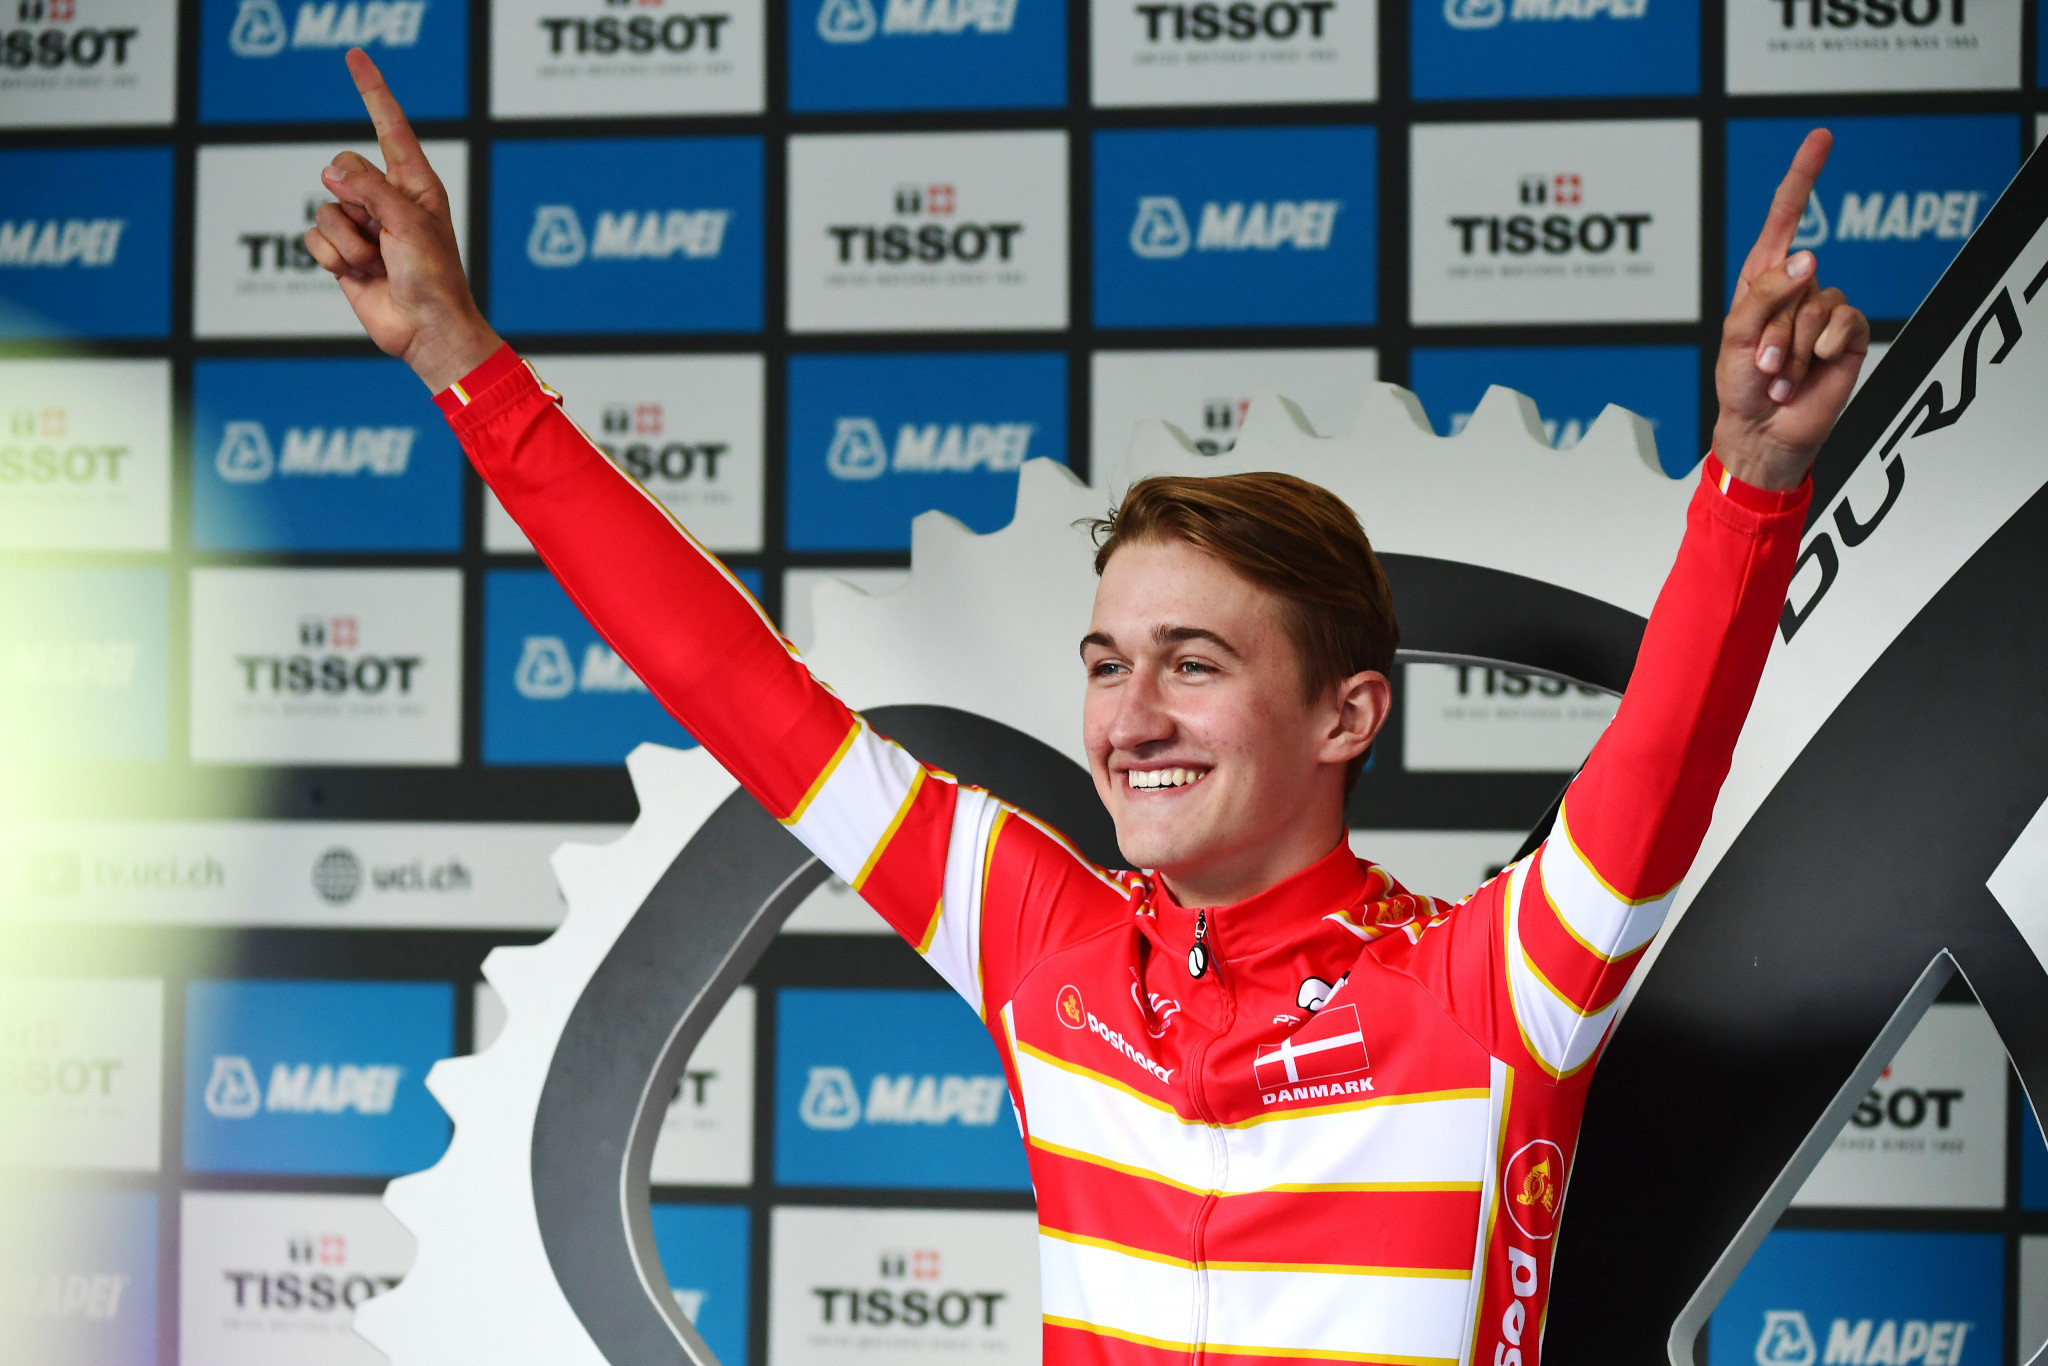 Bjerg dominates men's under-23 time trial at UCI World Road Championships in Bergen